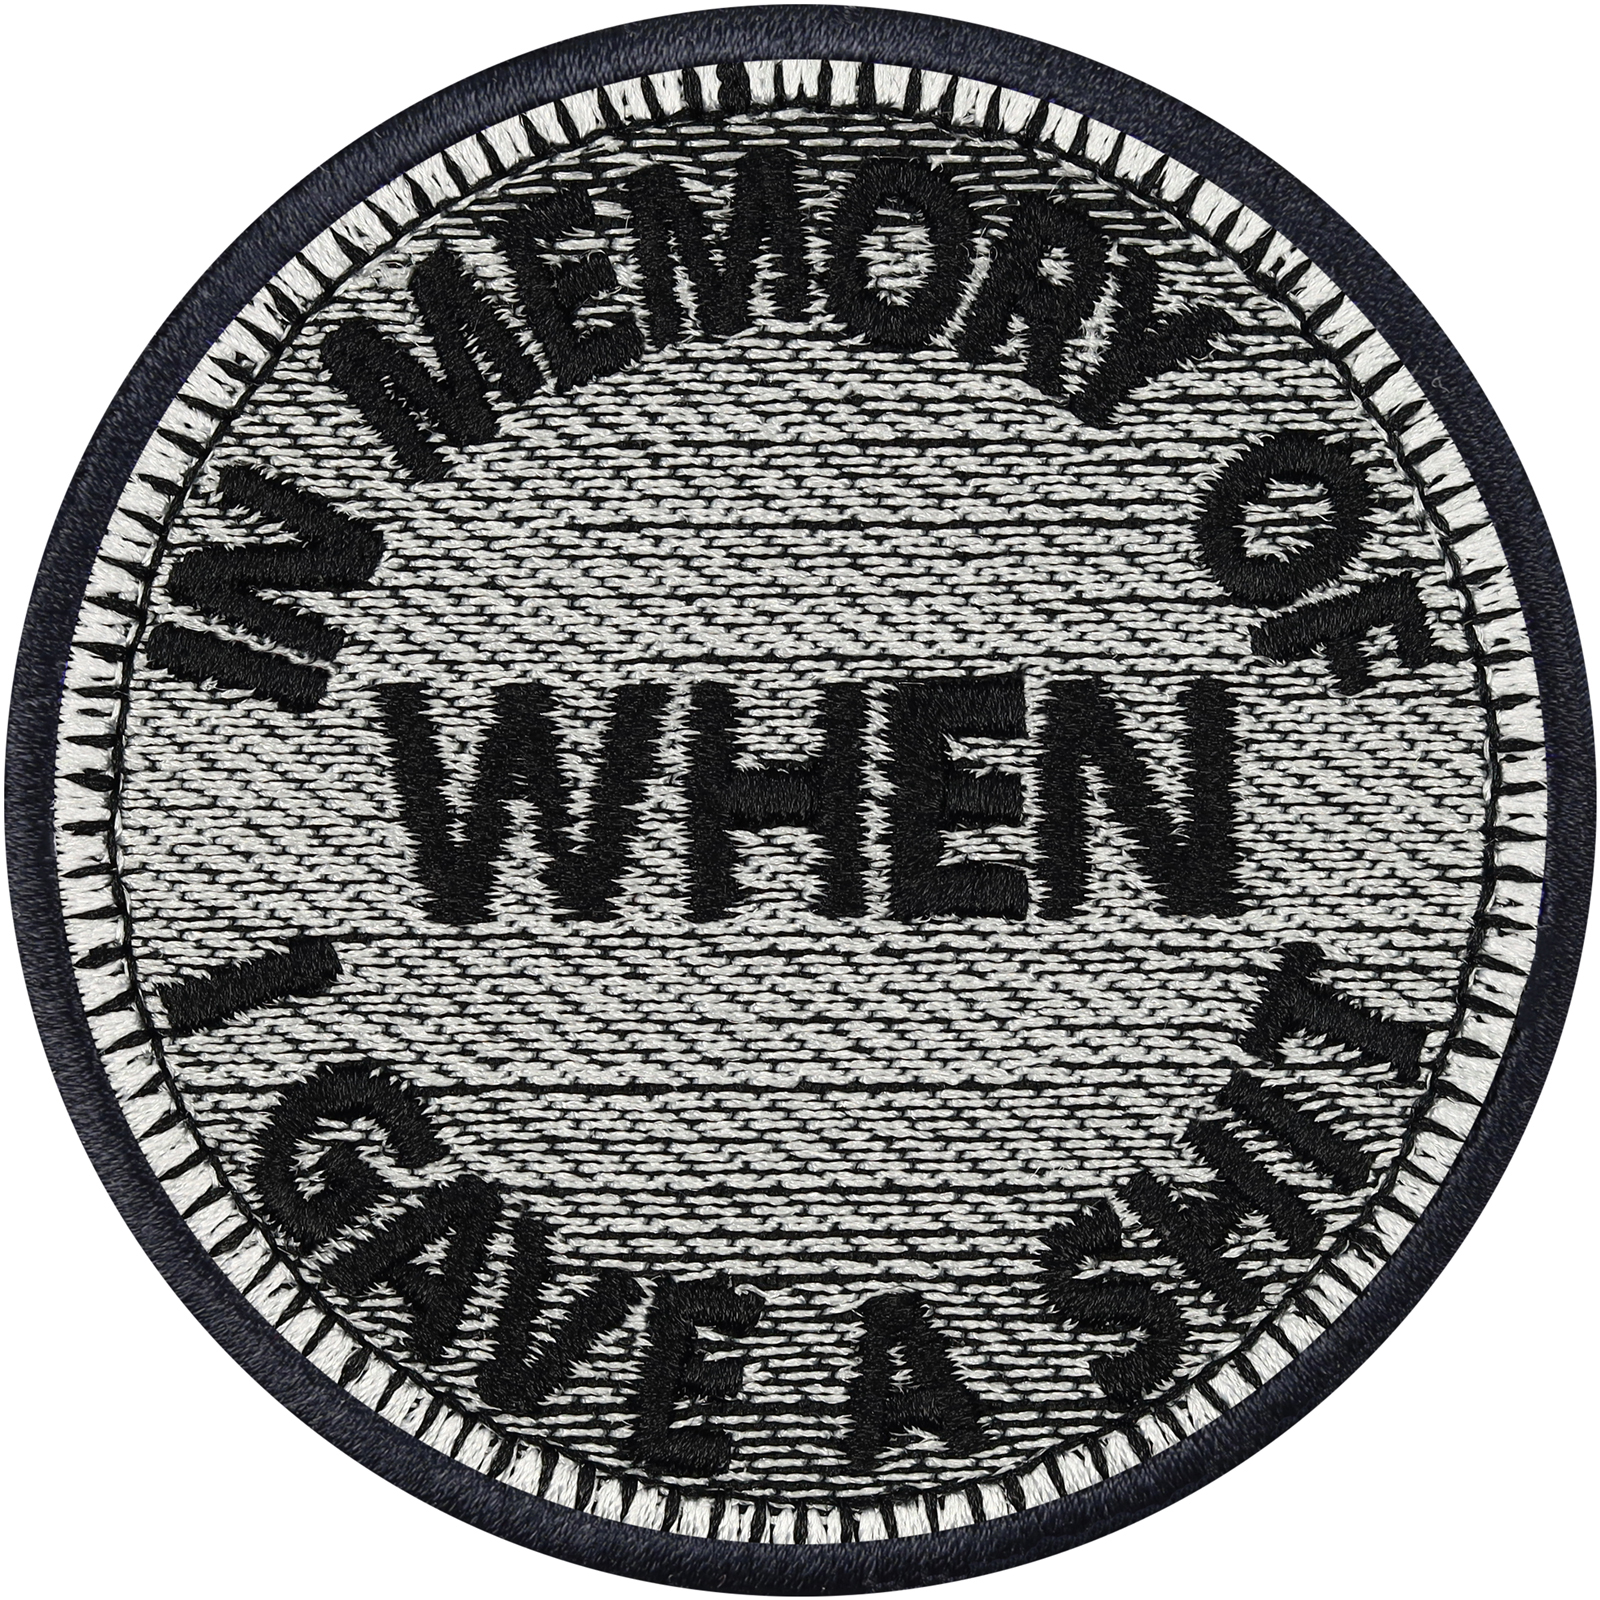 In memory of when I gave a shit - Patch